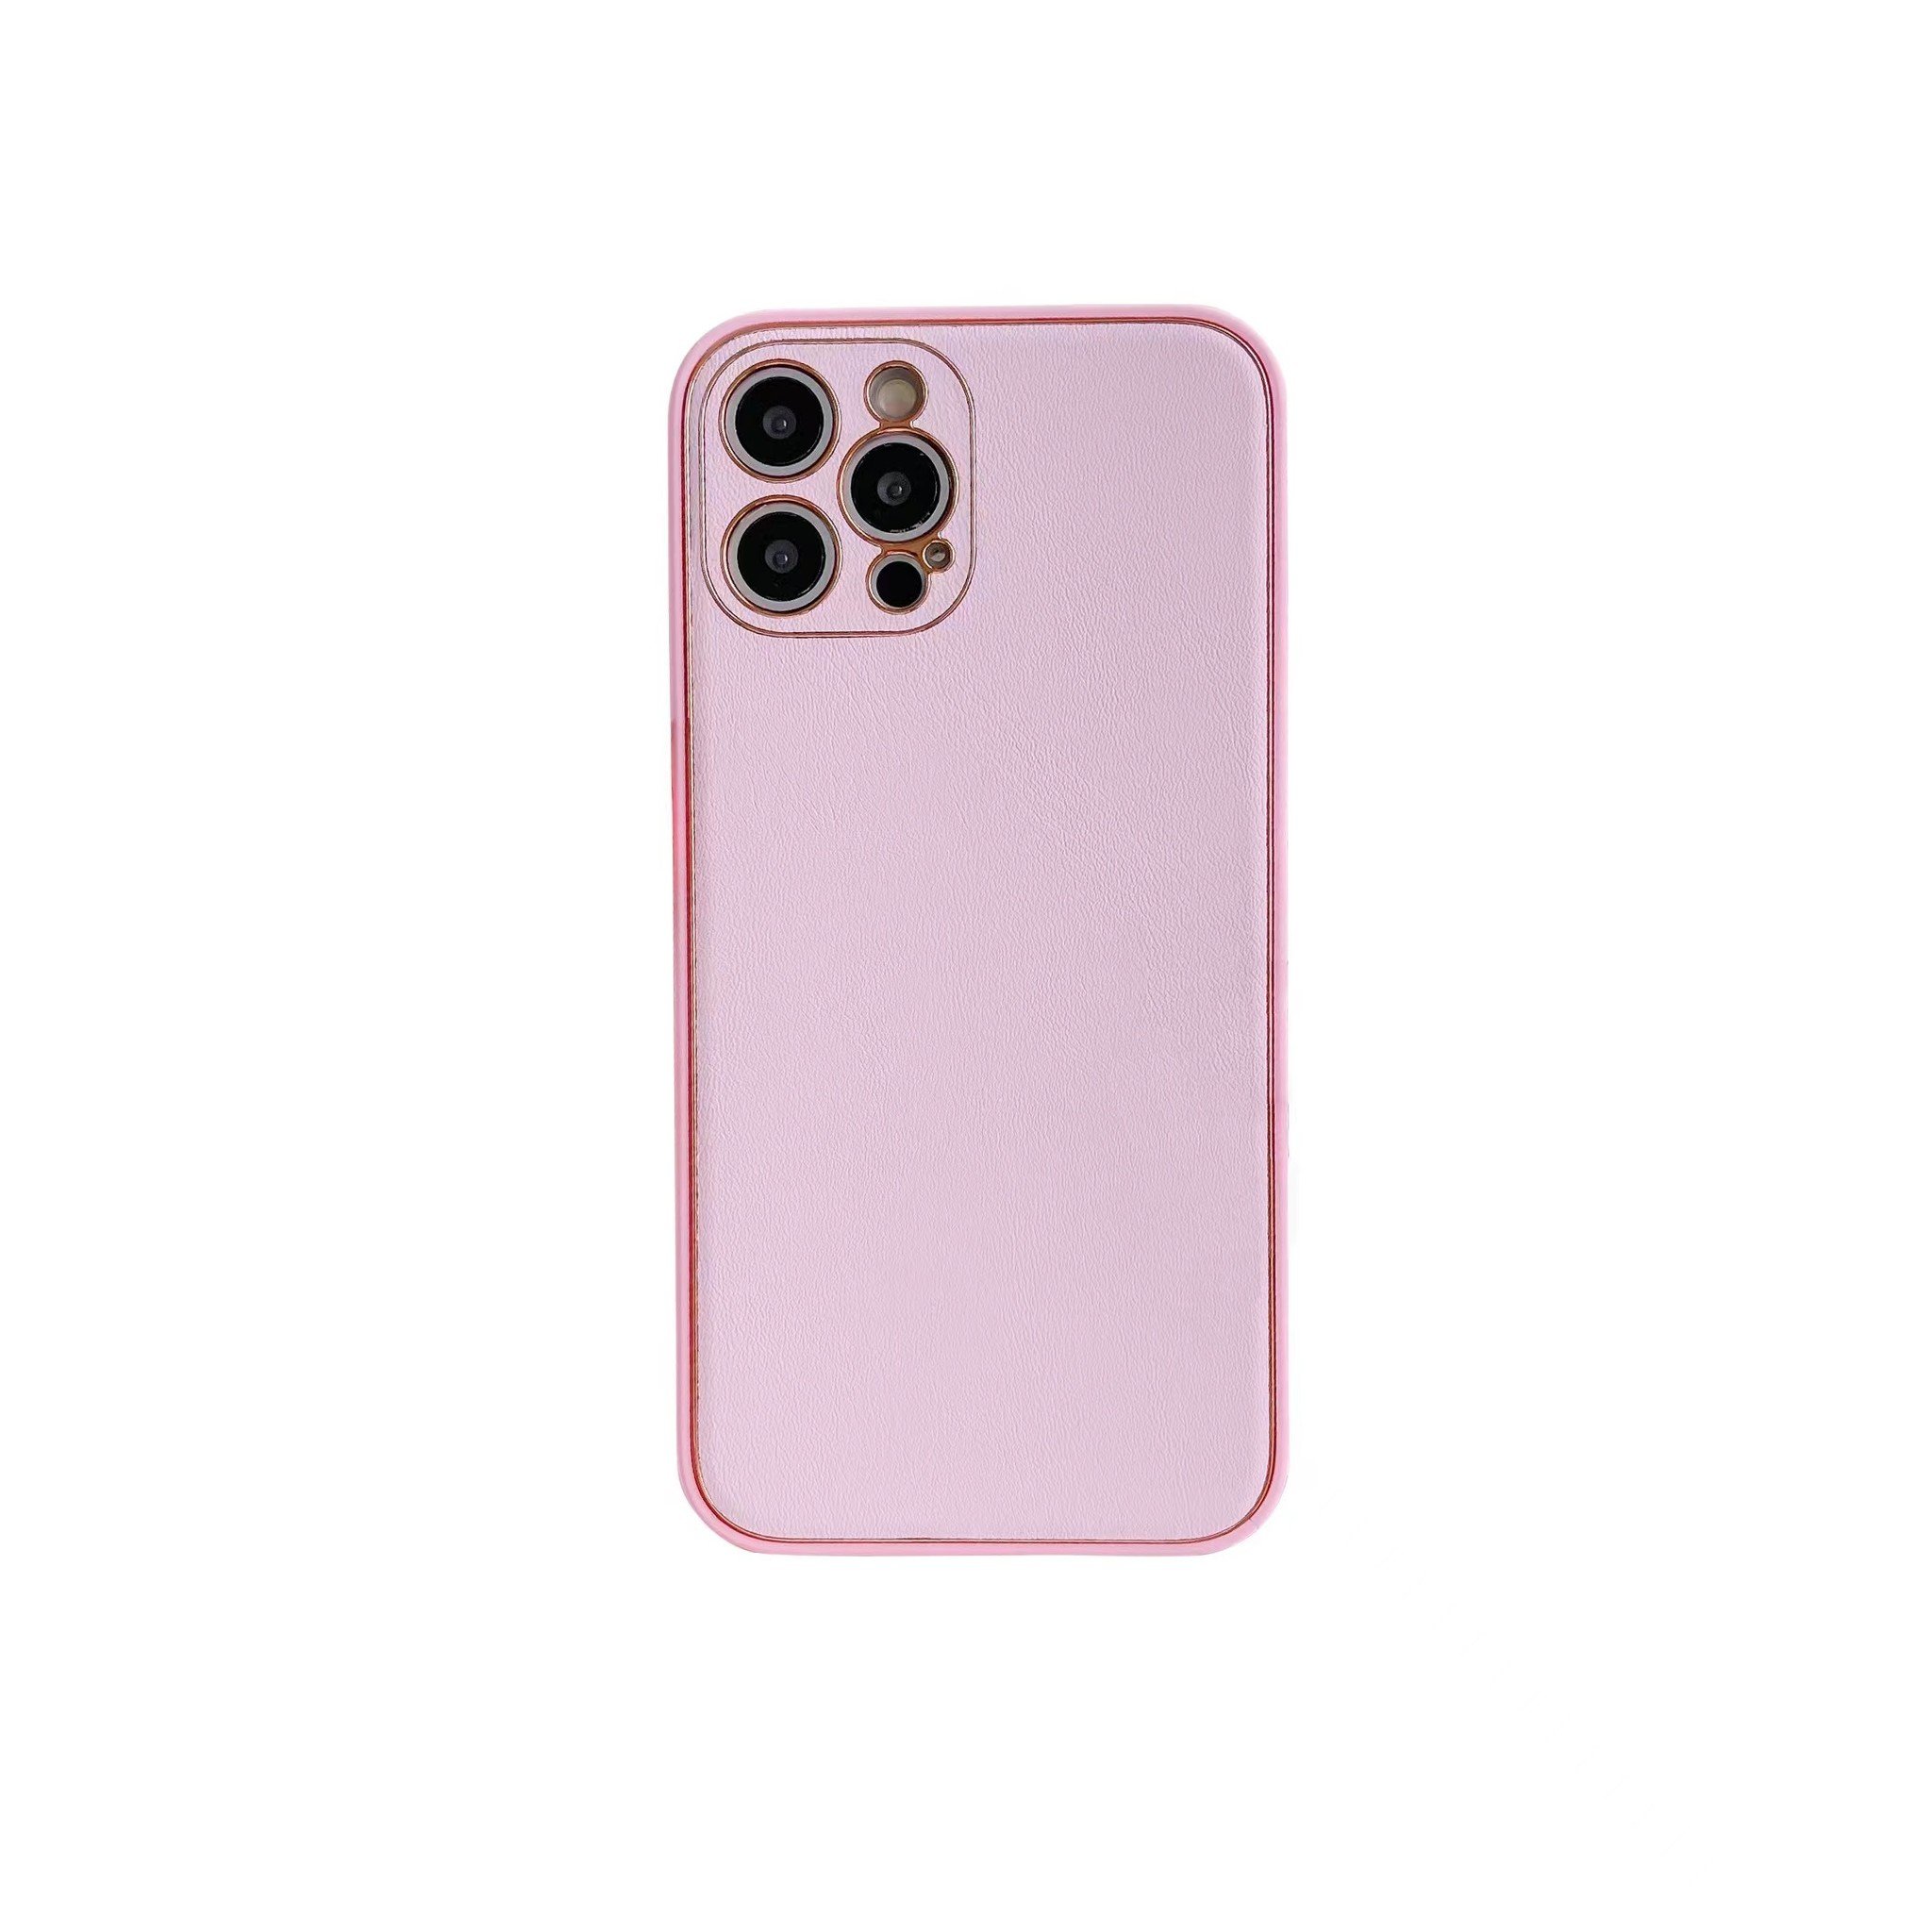 iPhone 11 Pro Max Back Cover Hoesje - leer - Luxe - Backcover - Apple iPhone 11 Pro Max - Roze/Goud